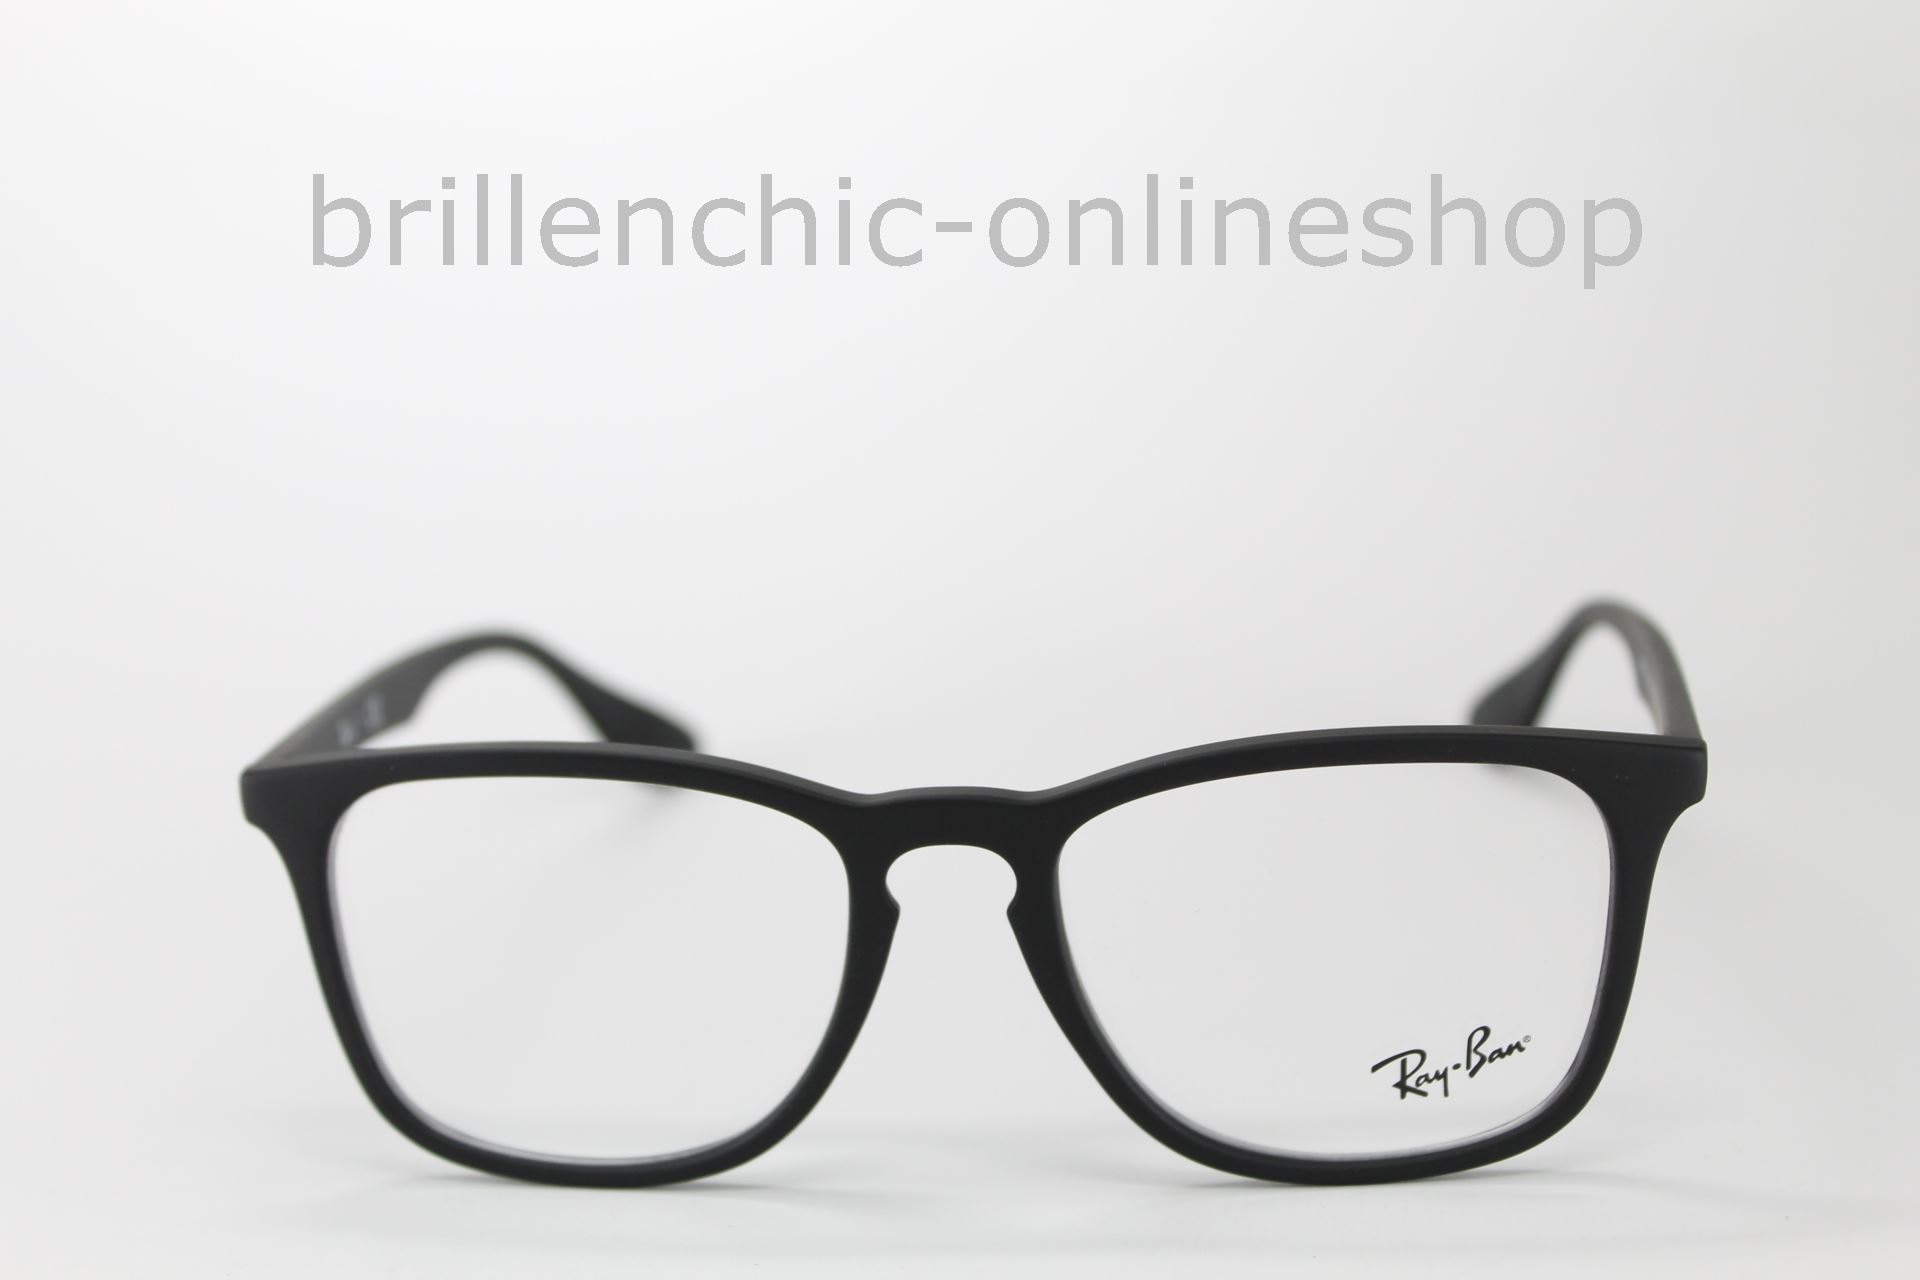 Brillenchic-onlineshop in Berlin - Ray Ban RB 7074 5364 